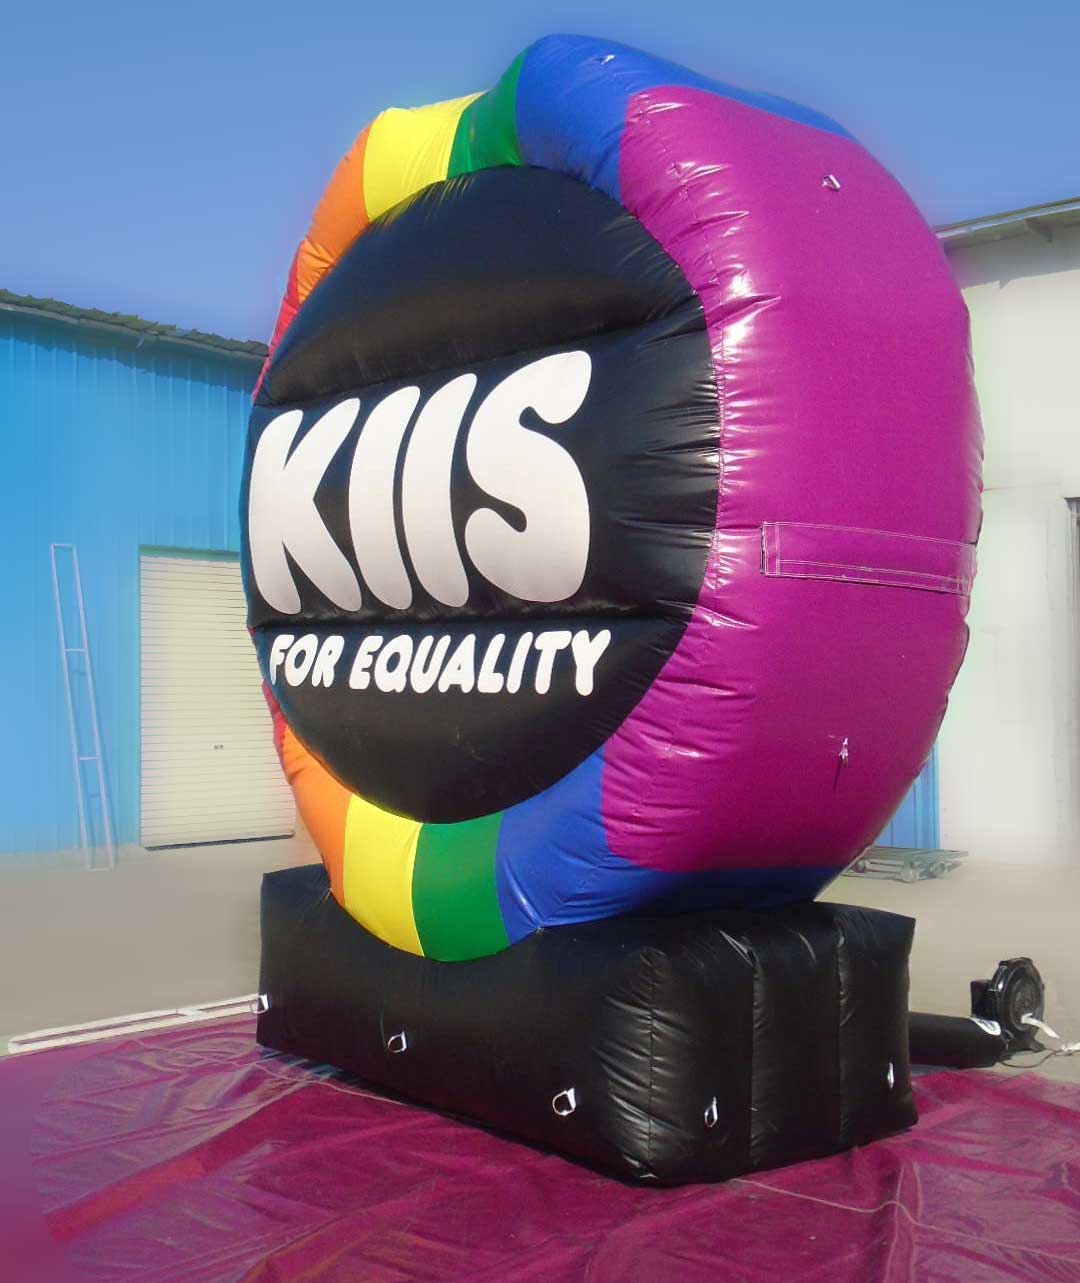 An additional unit featuring the KIIS frequency in other states and another pride-themed logo.